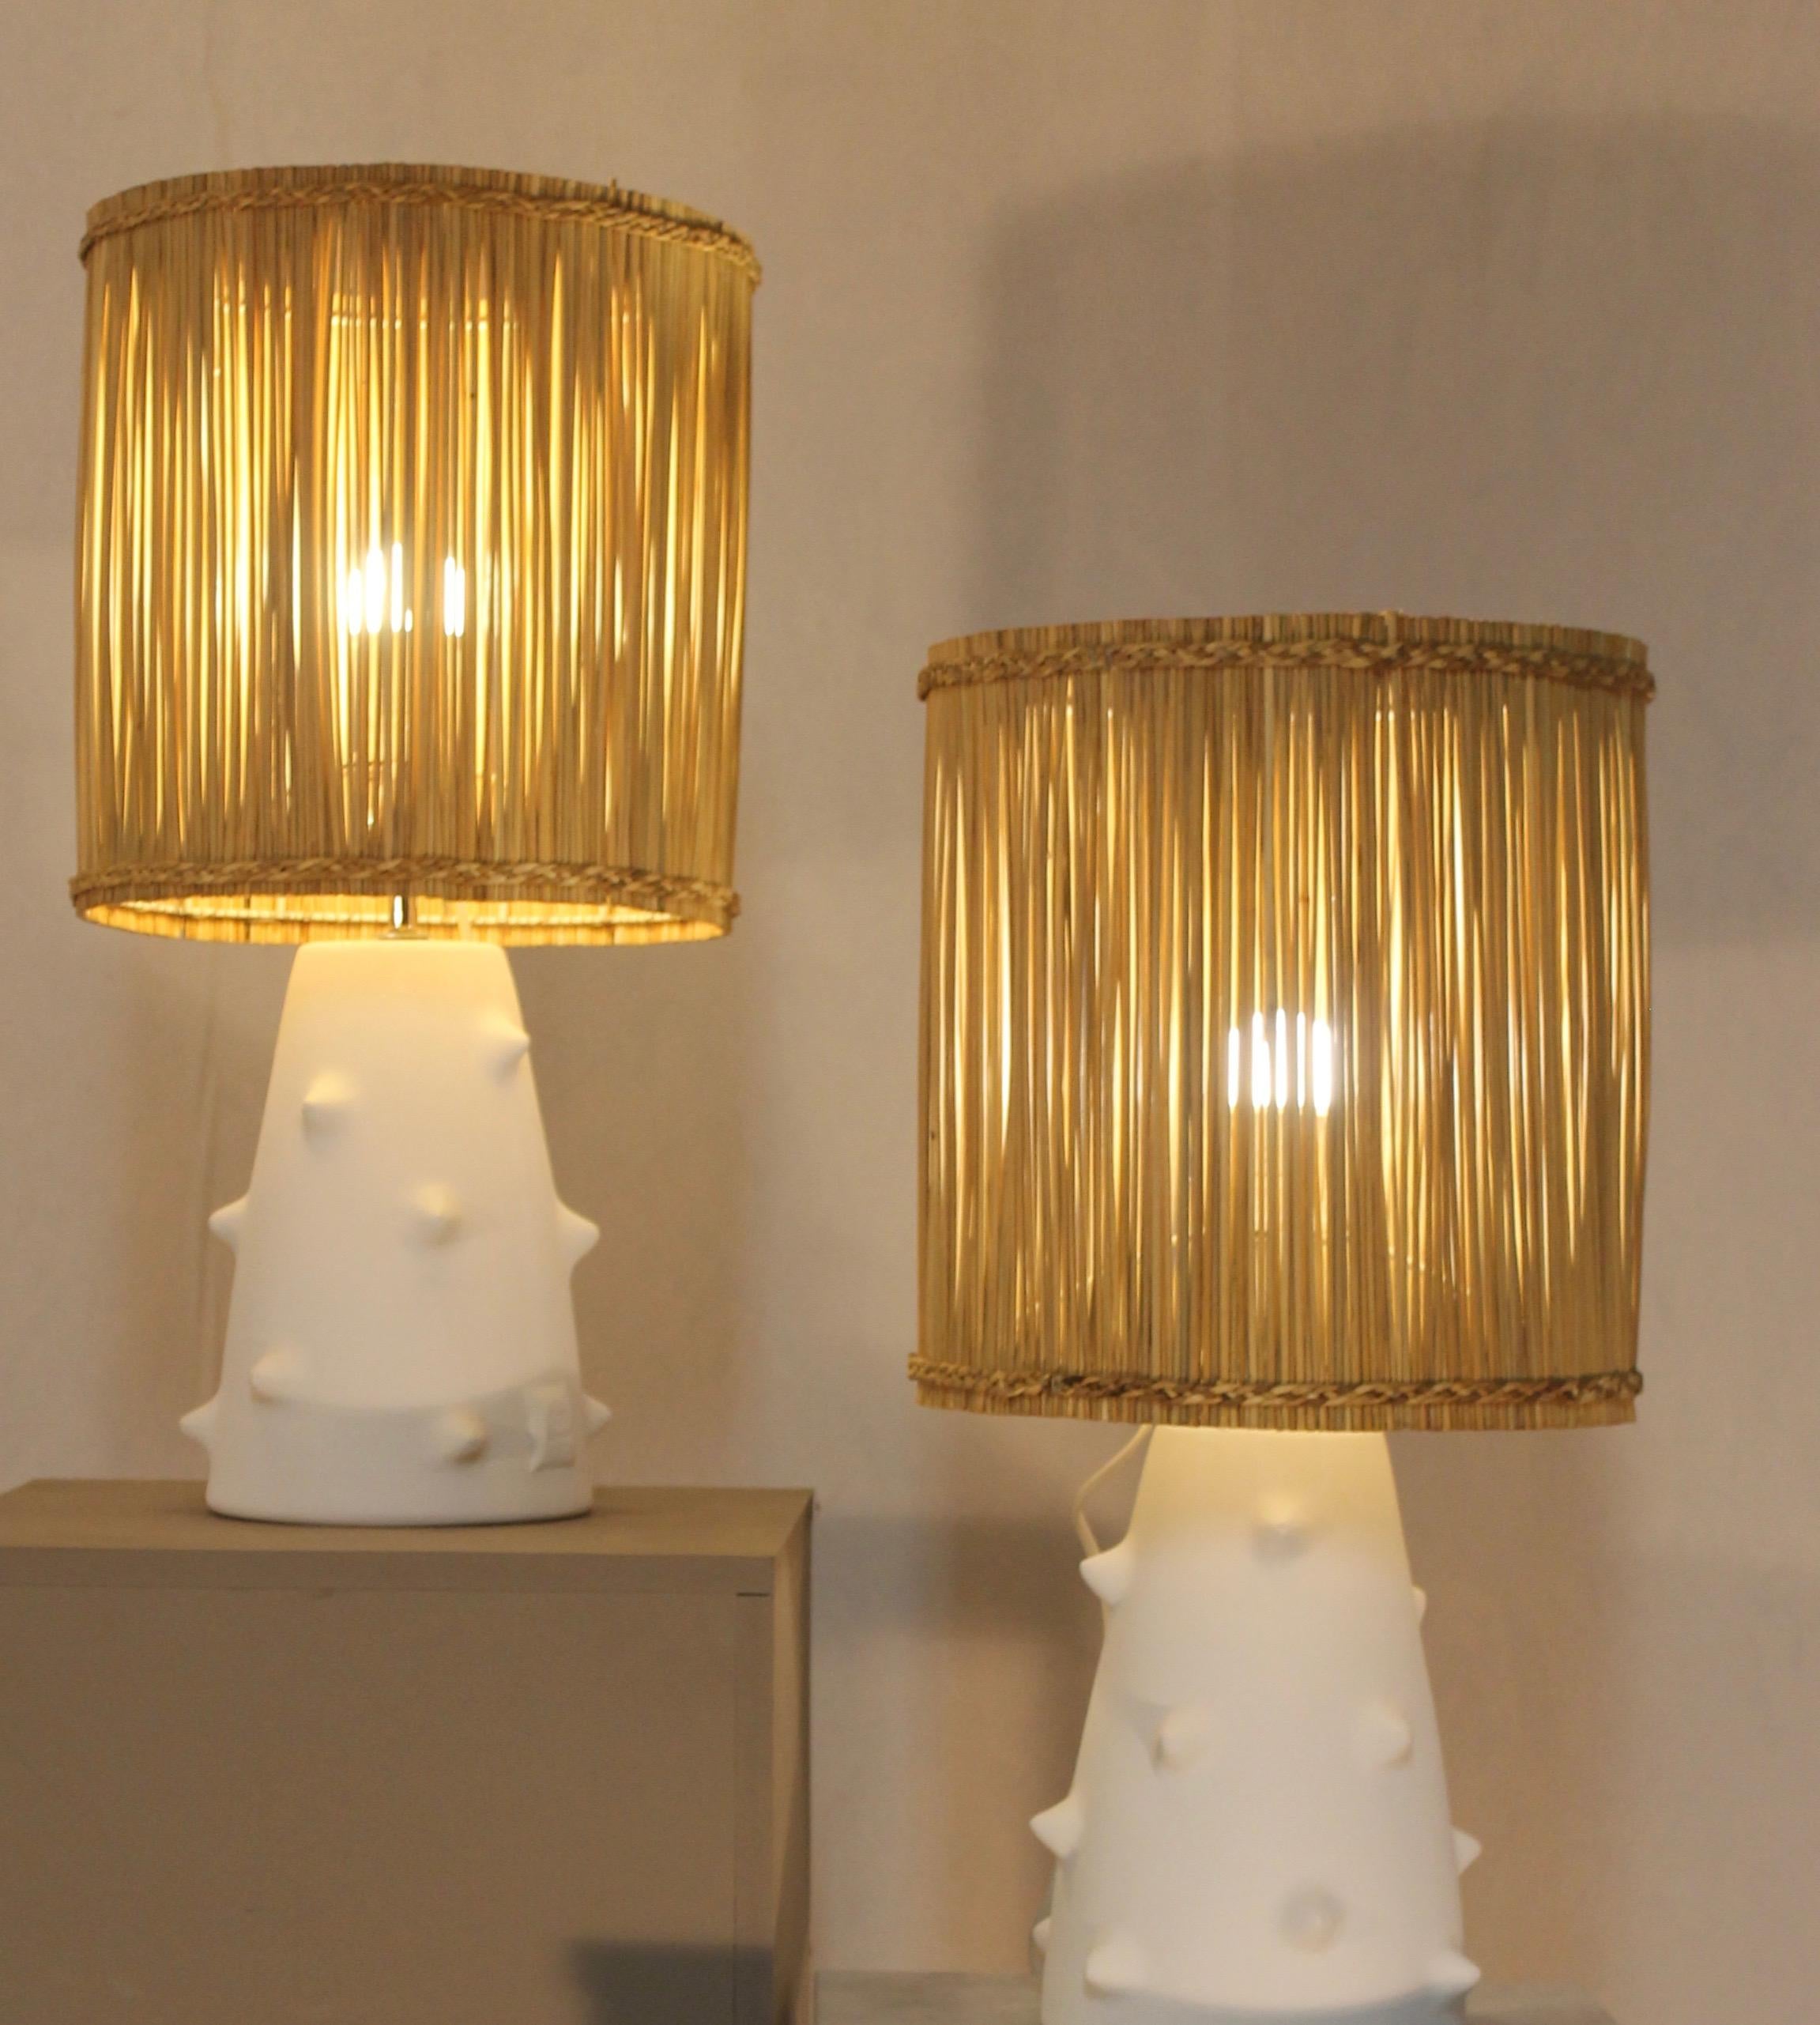 Pair of plaster lamps with raffia shade, very original, handmade work that makes them unique. E27 base.